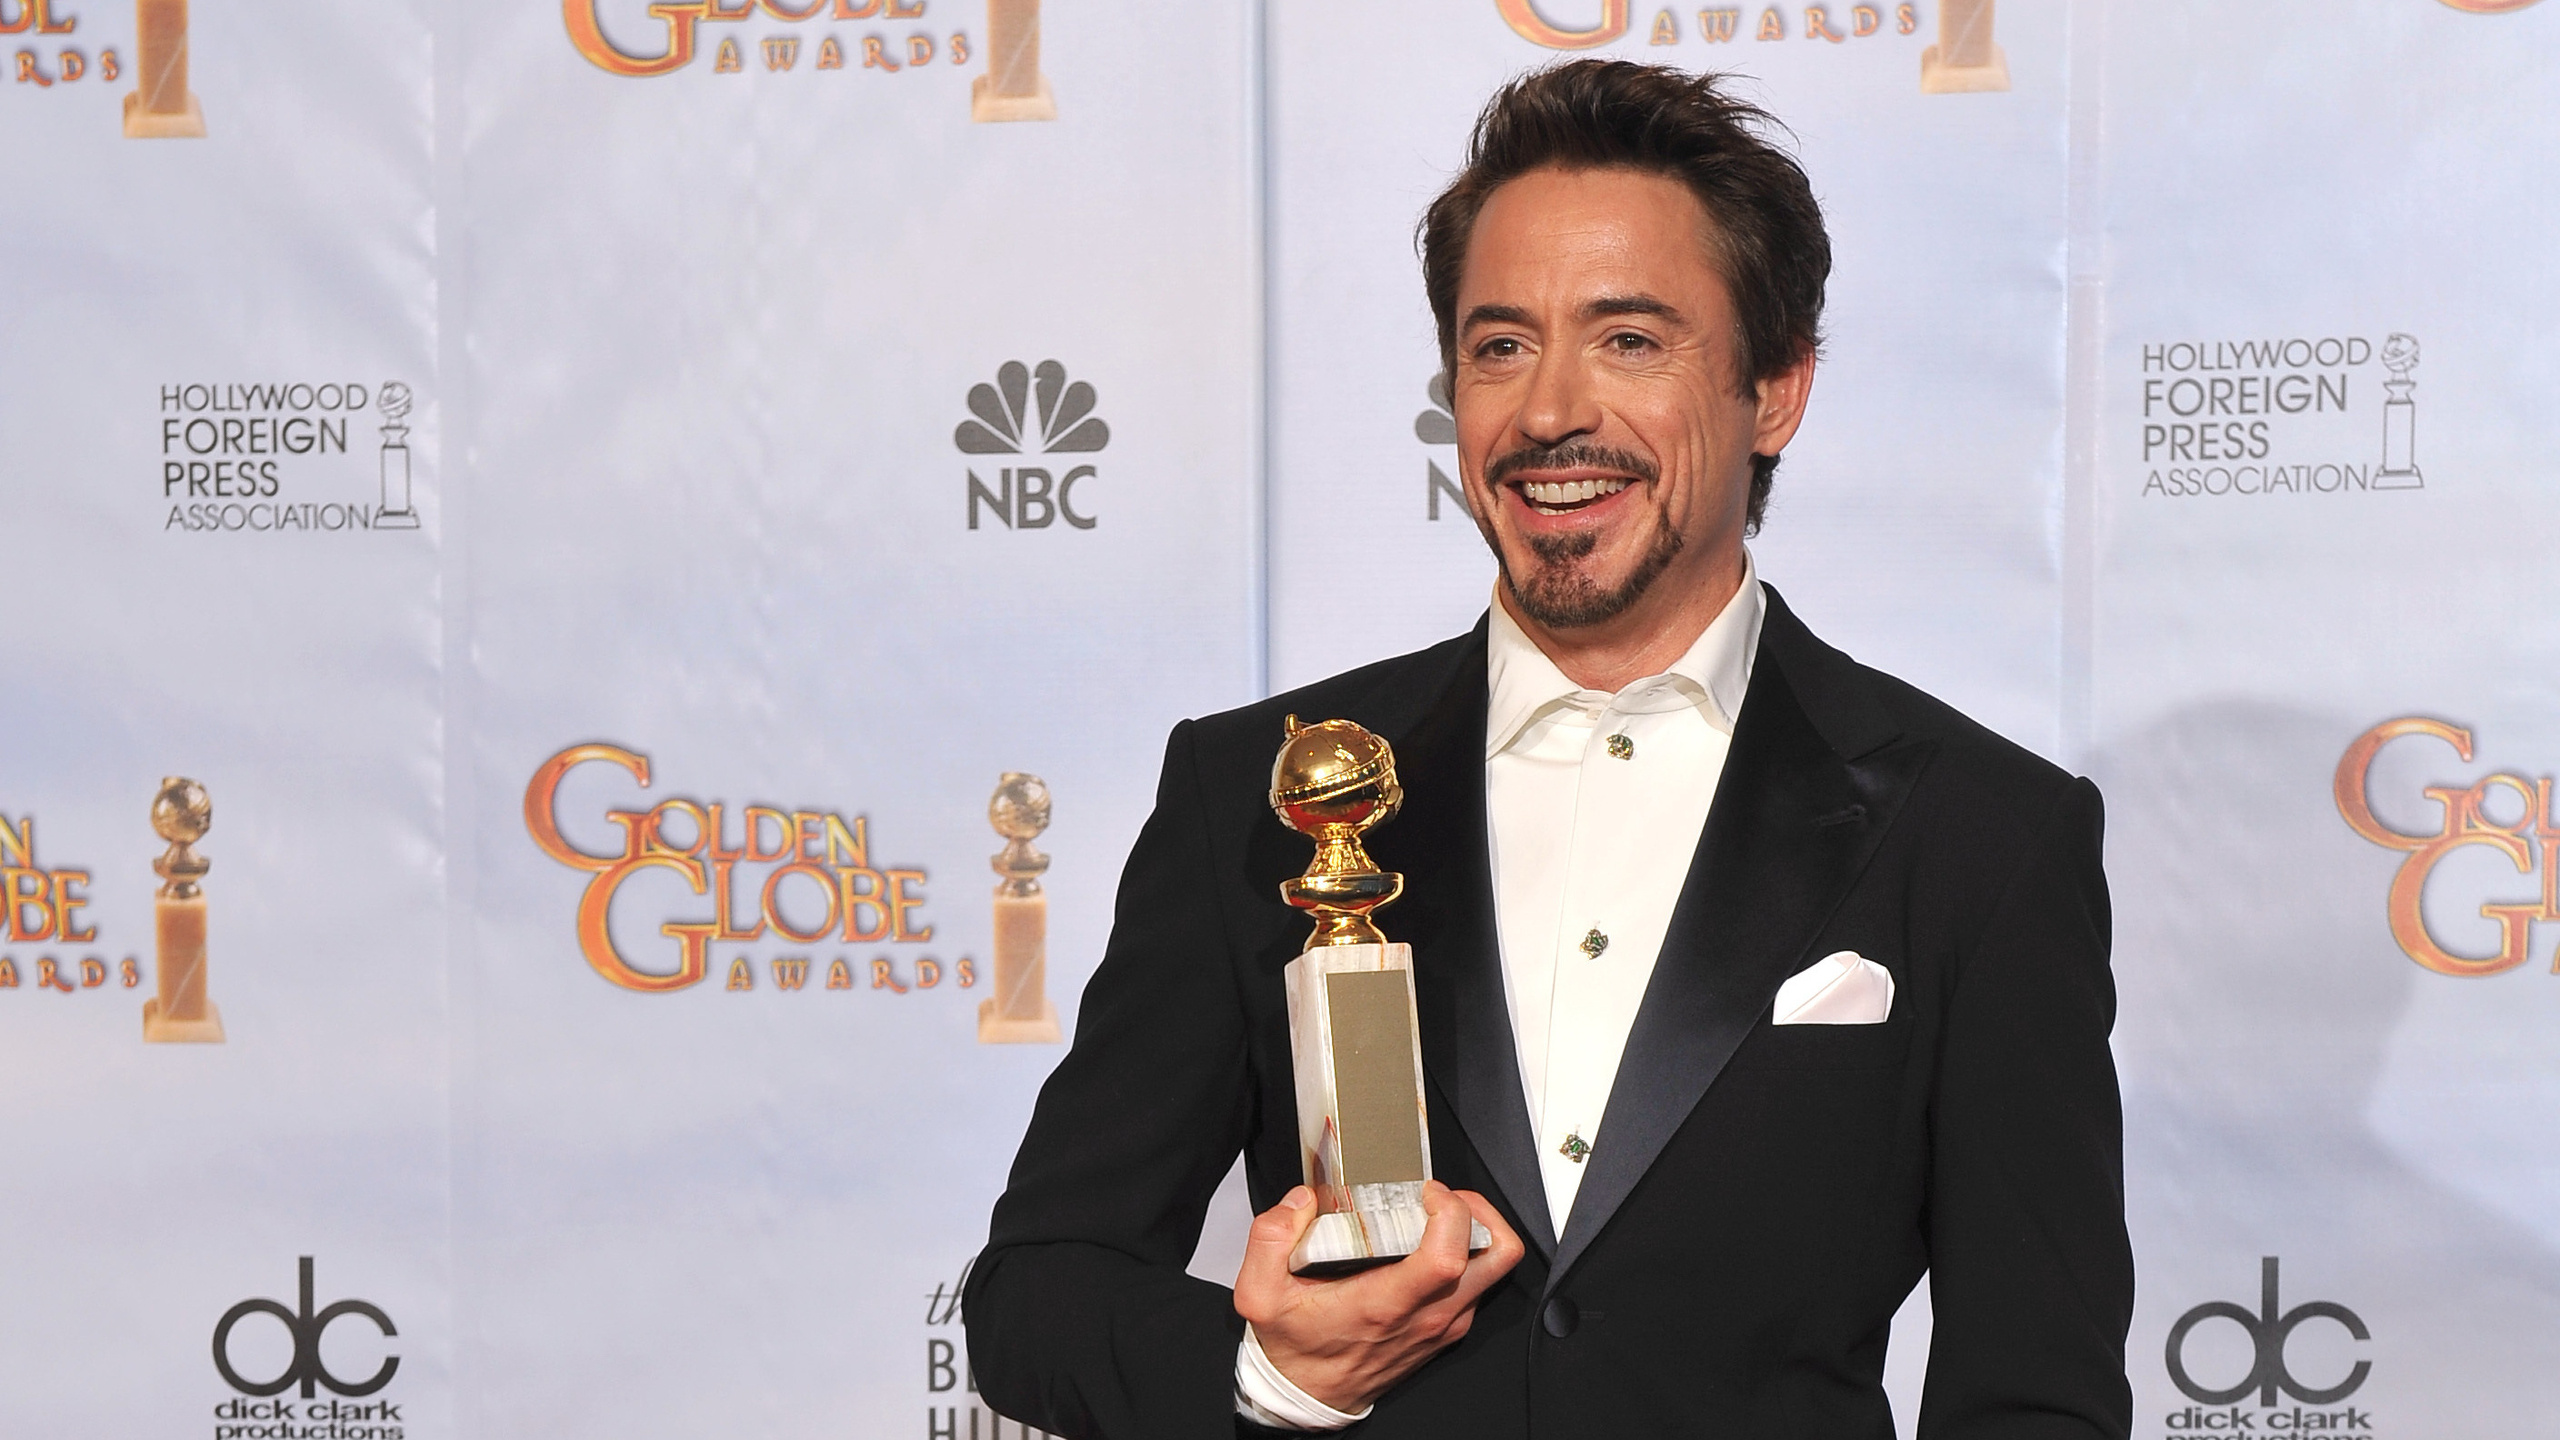 Robert Downey Jr.: The title character in Guy Ritchie's Sherlock Holmes, The second Golden Globe, 2009. 2560x1440 HD Wallpaper.